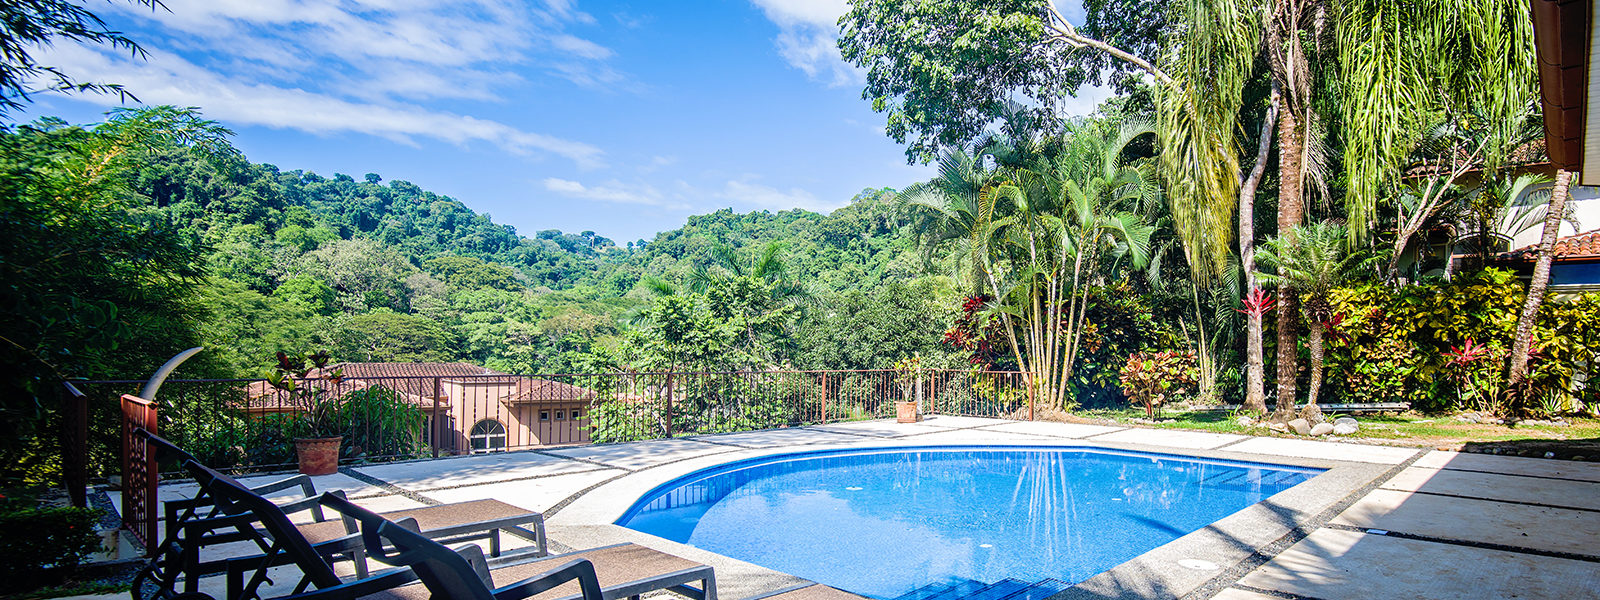 This luxury villa features a large secluded pool surrounded by lush, tropical beauty.